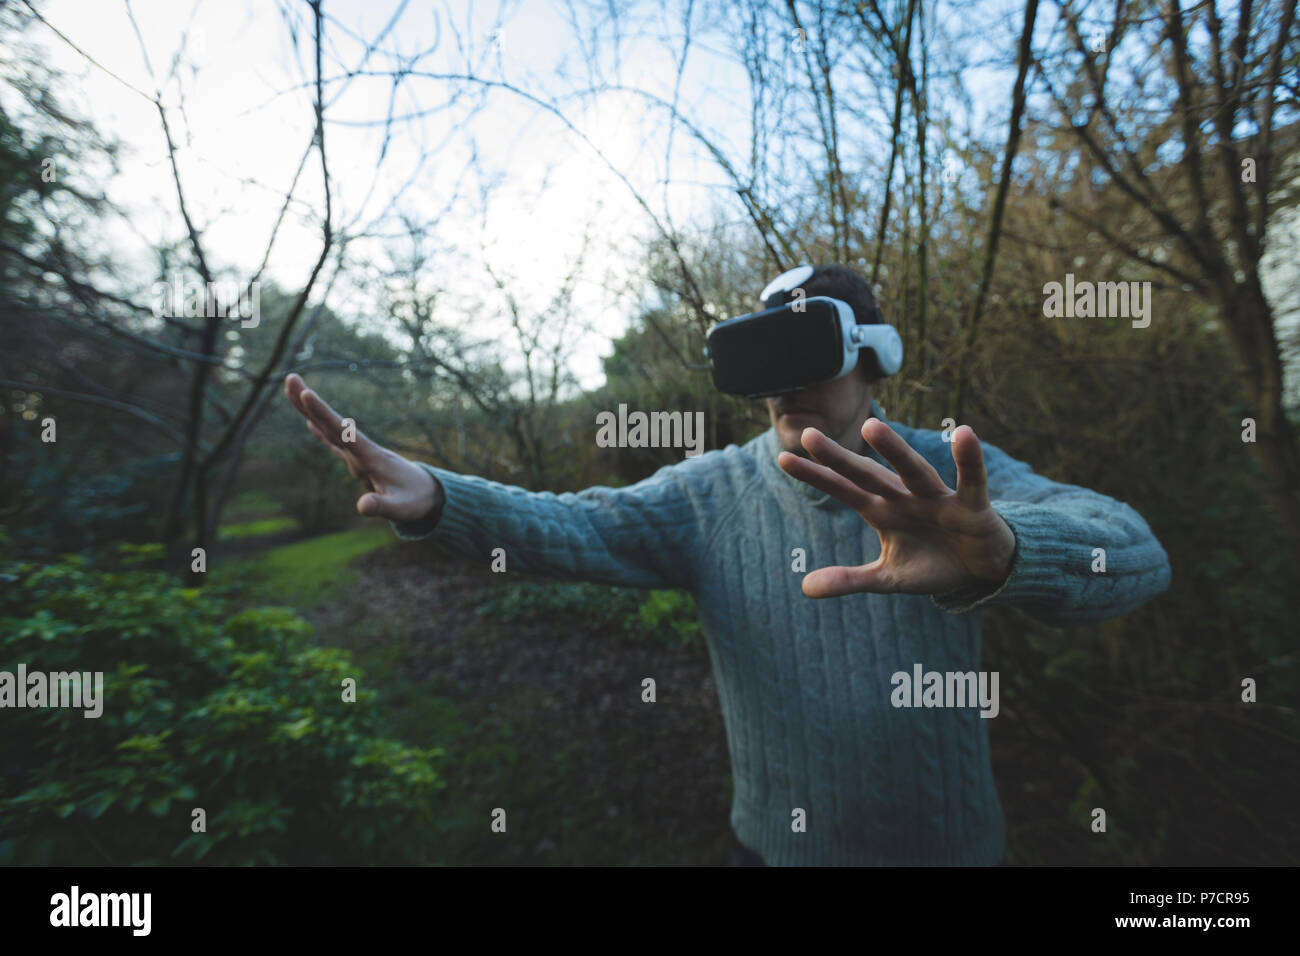 Man using virtual reality headset in forest Stock Photo